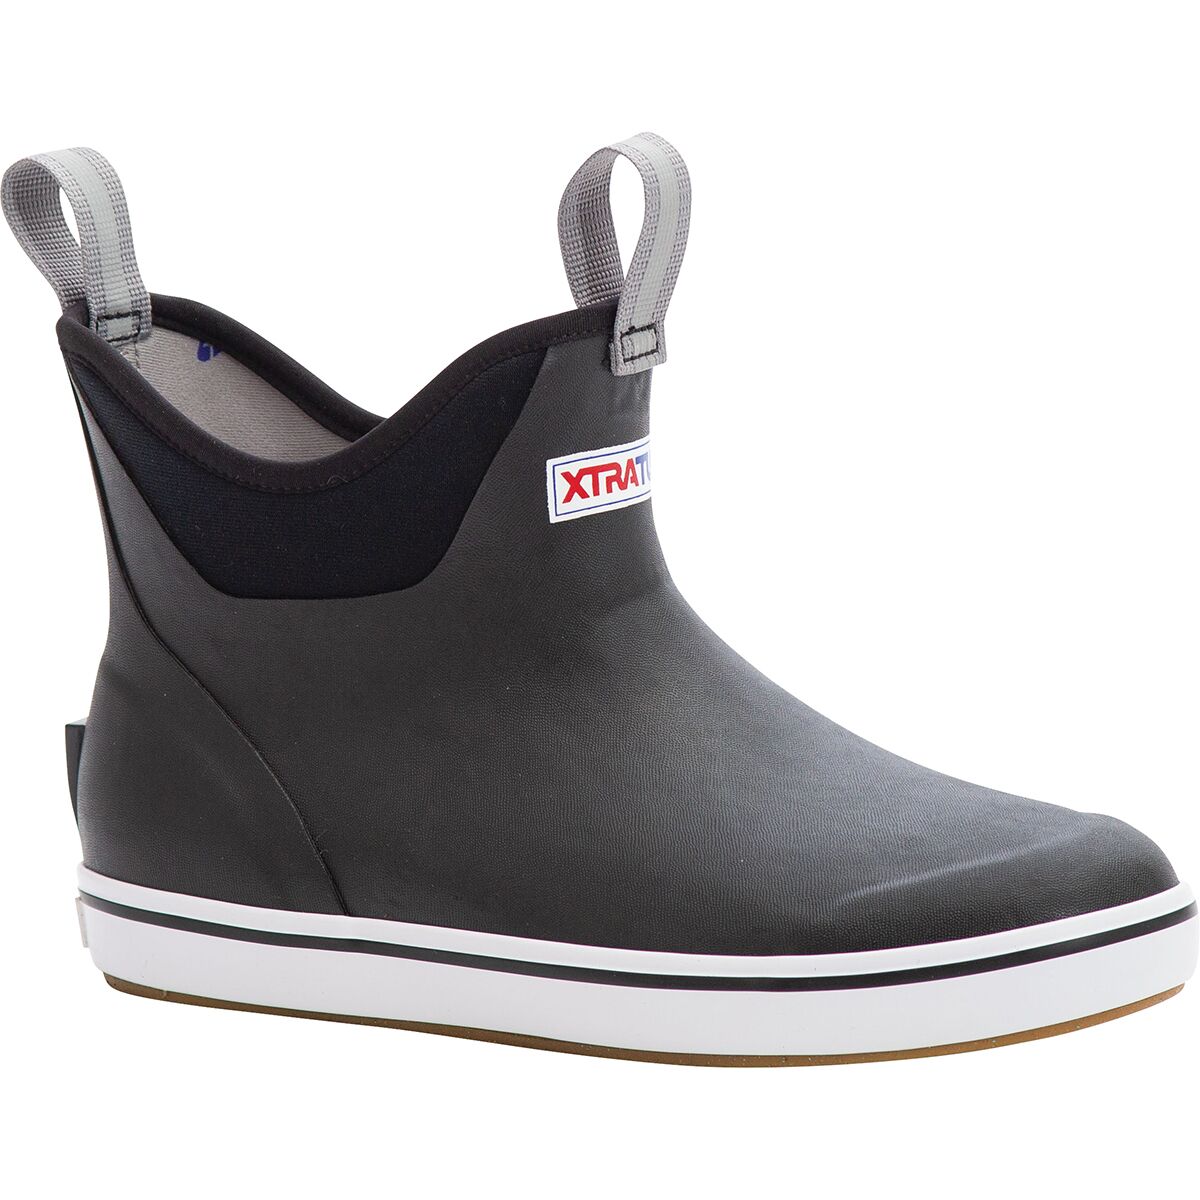 Ankle 6in Deck Boot - Women